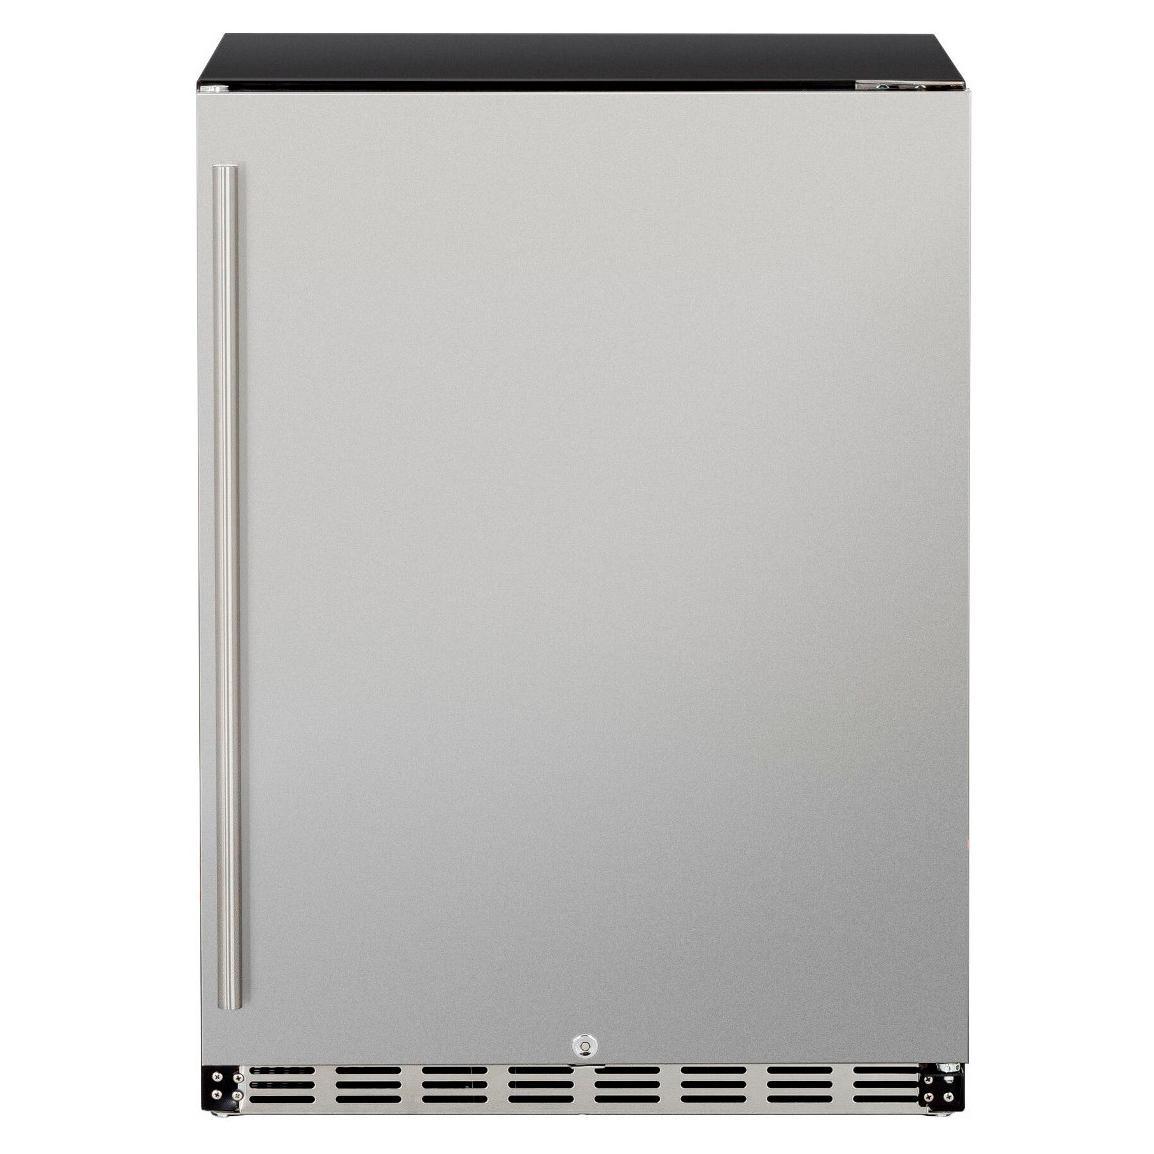 Summerset Grills Summerset Refrigeration Refrigerator, 24" Outdoor Rated - 5.3ft3 - Left-to-Right Opening